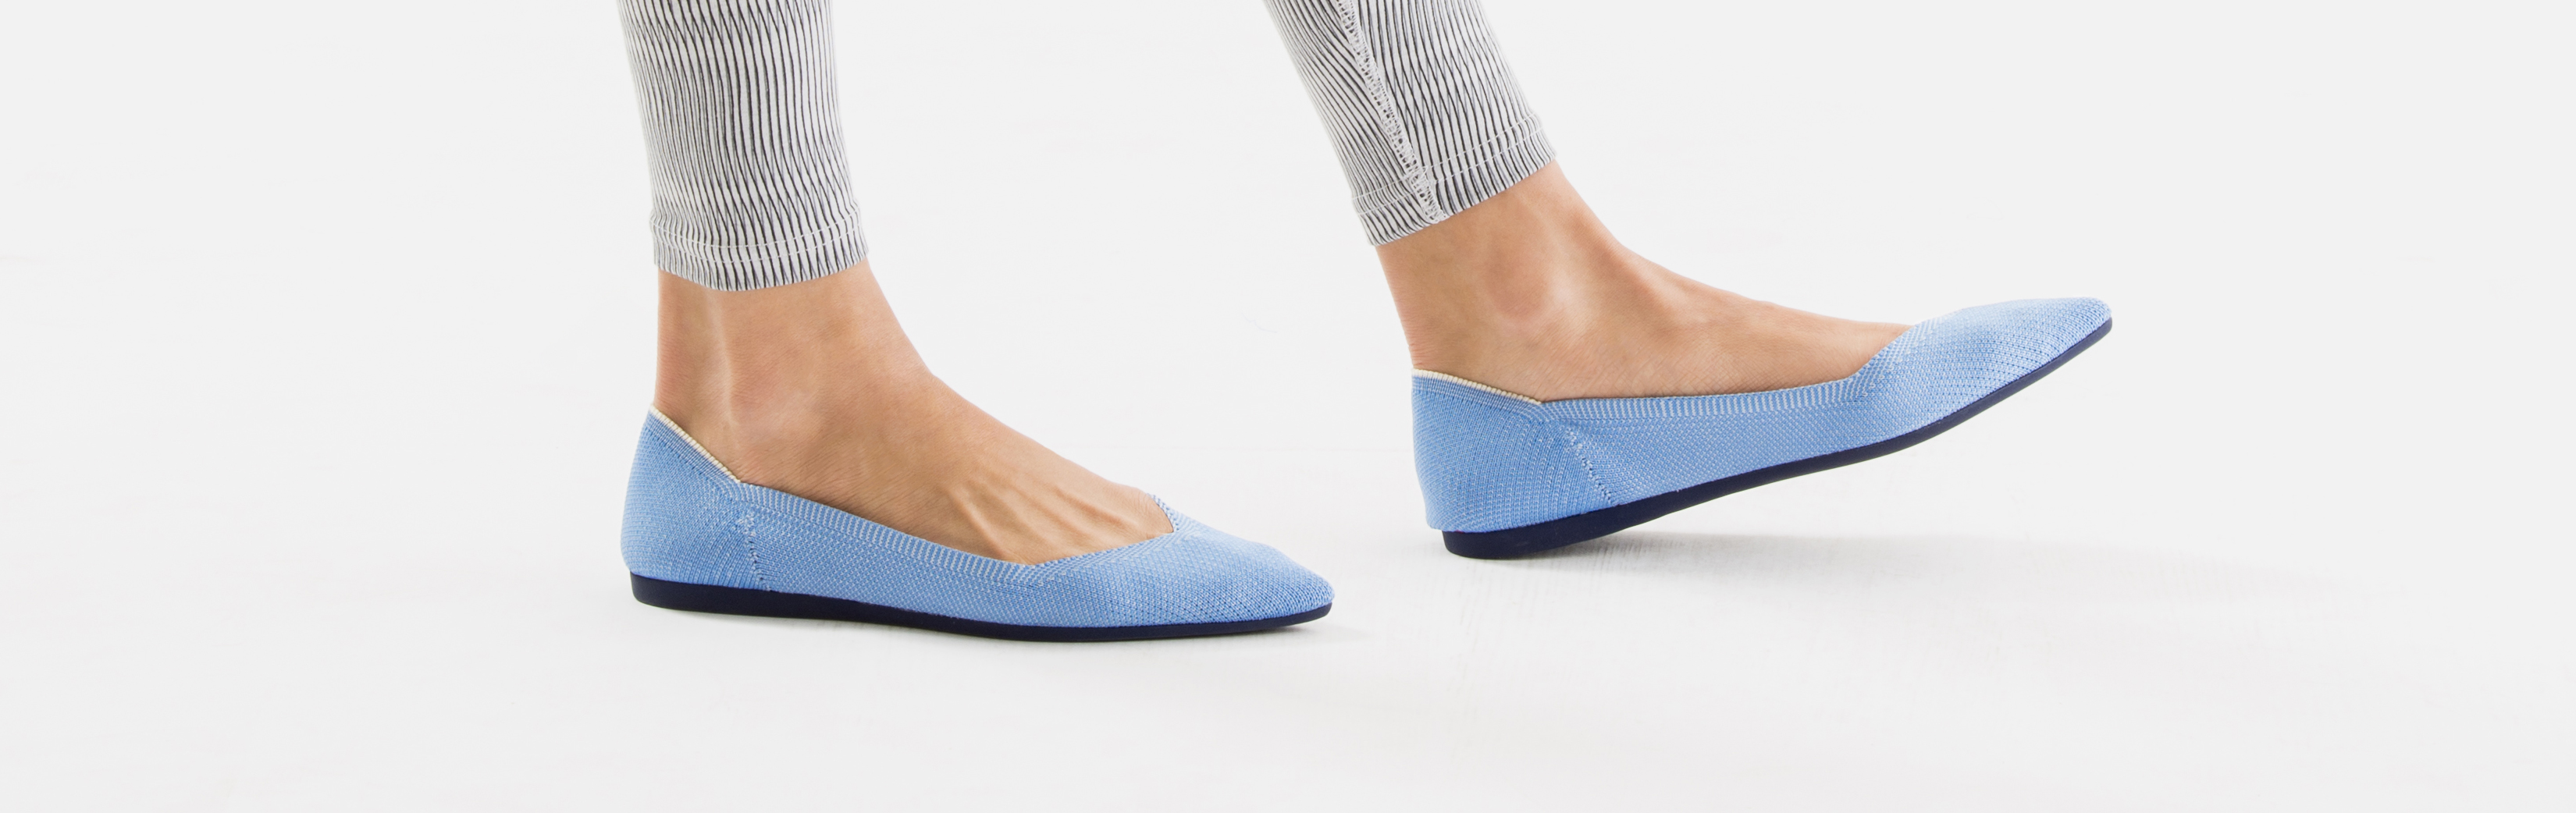 7 Slip-on Shoes for Speeding Through Security